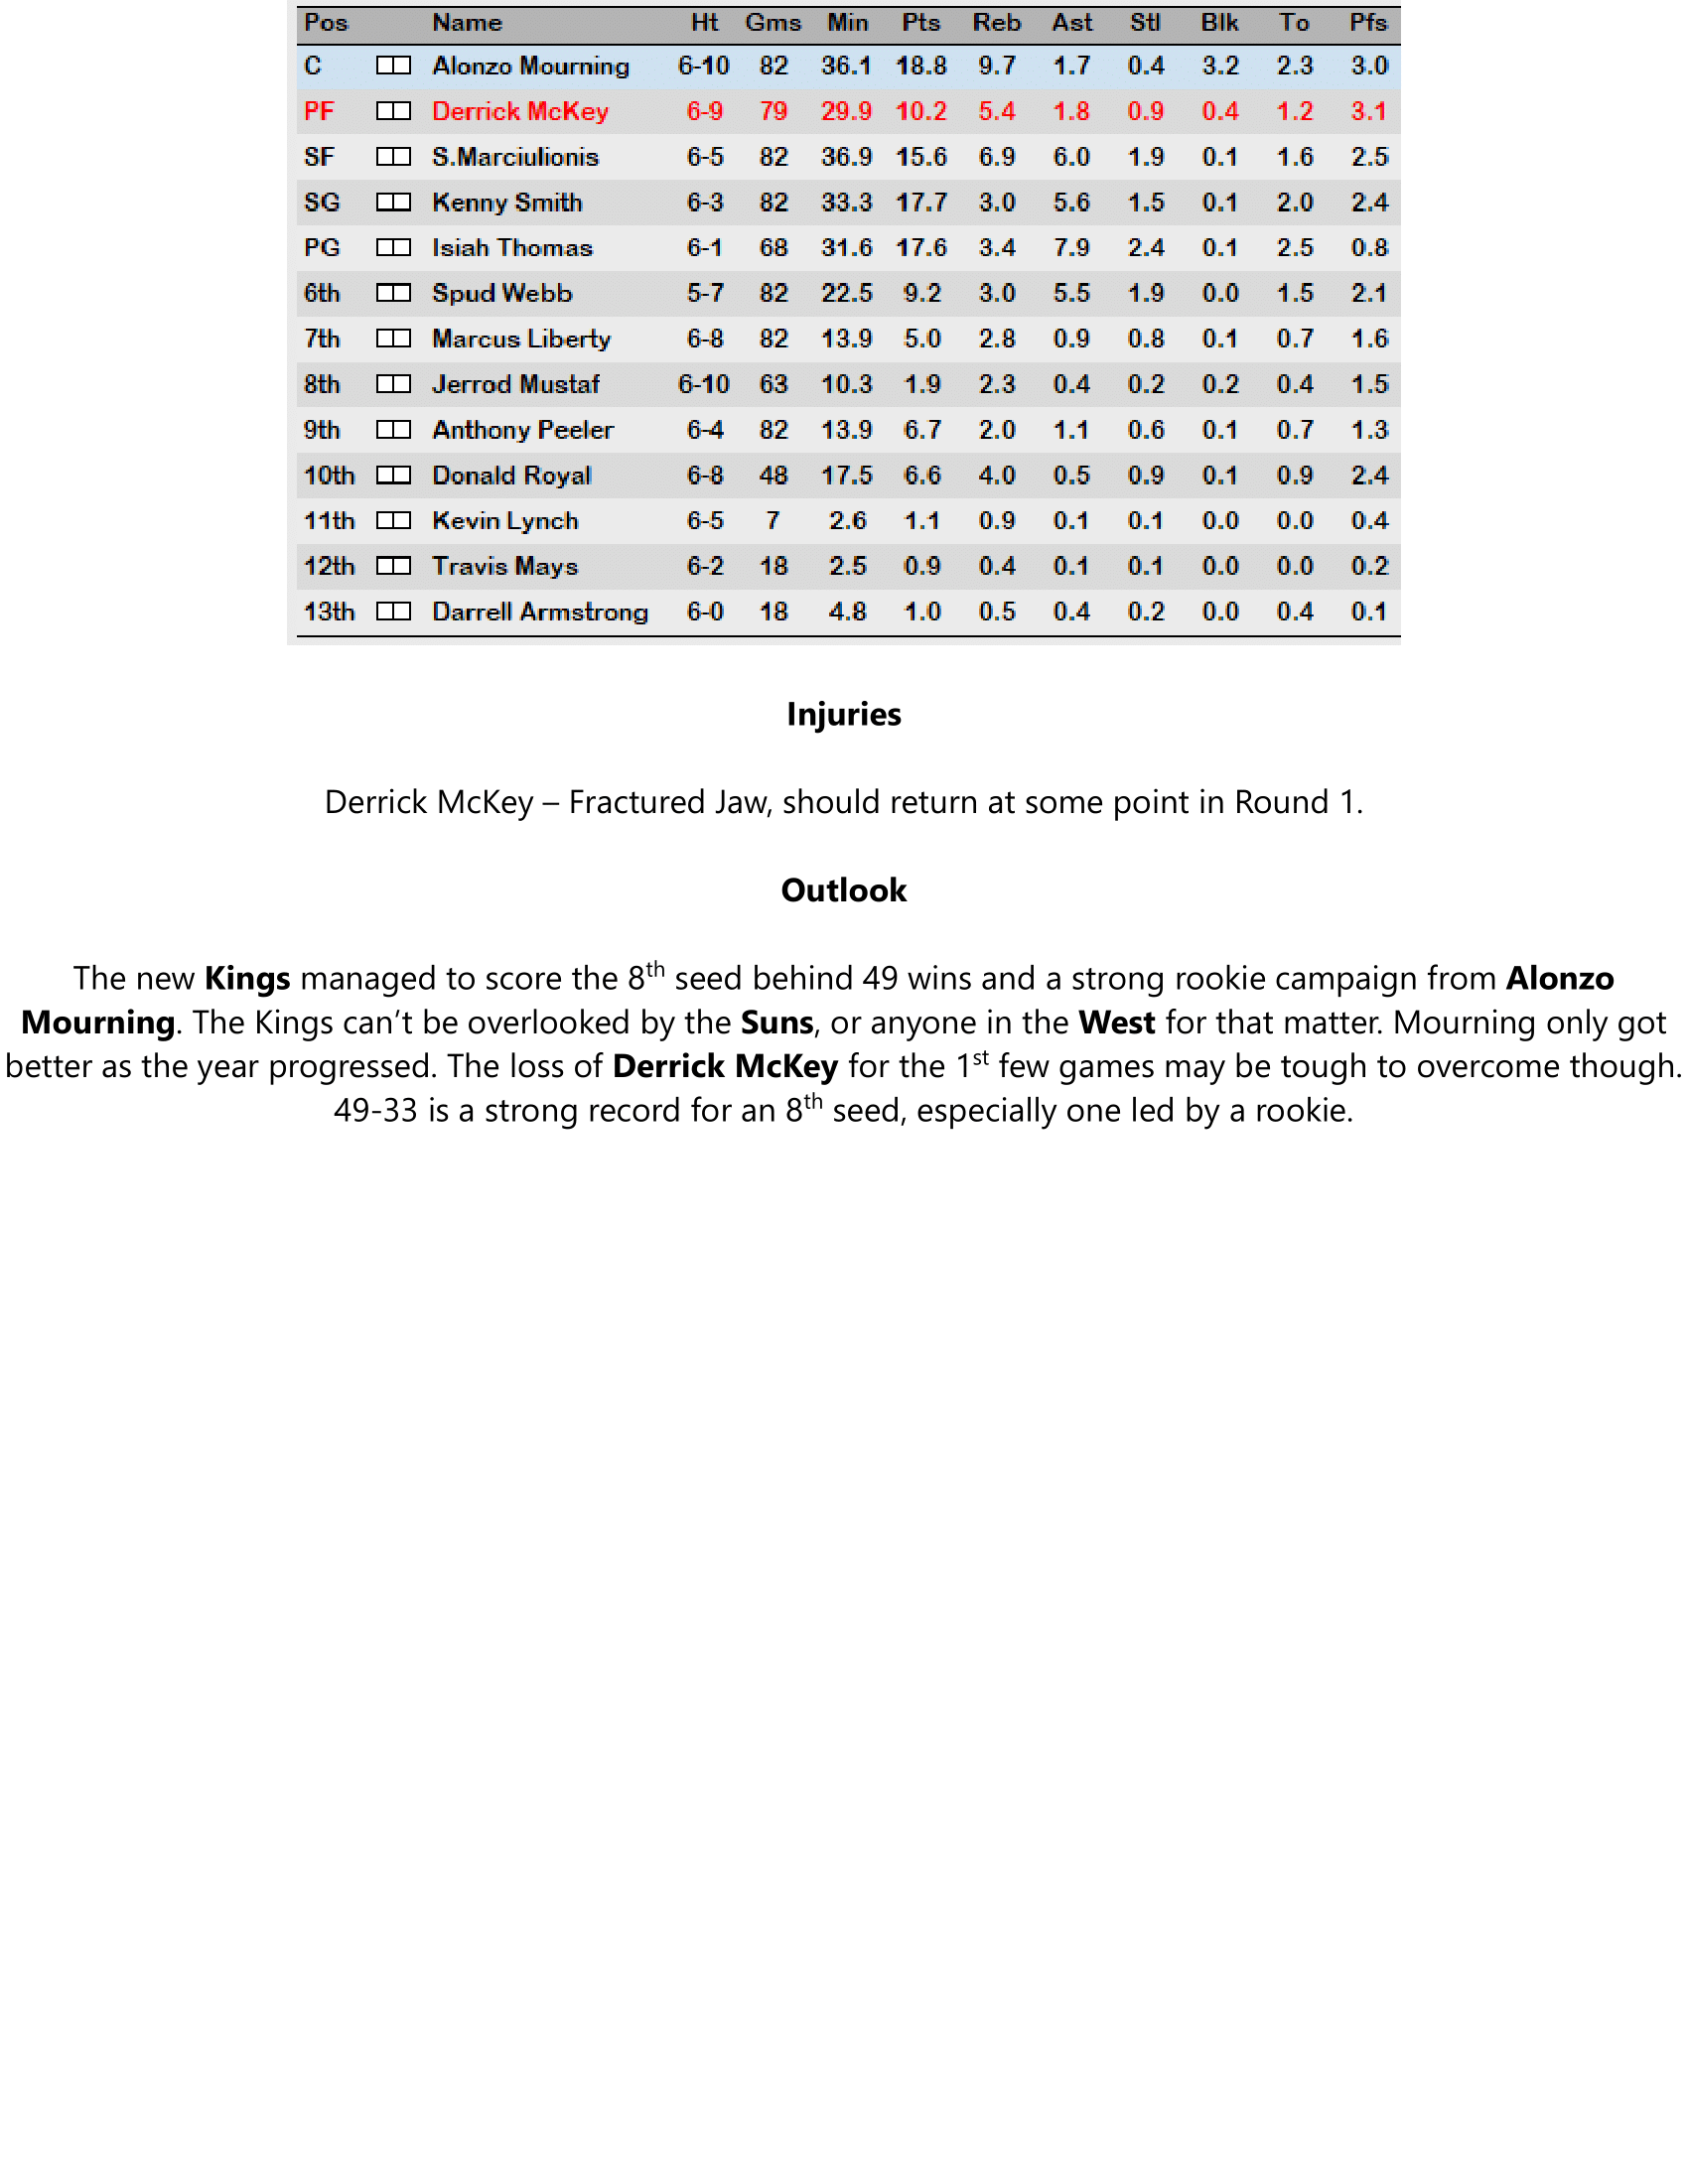 92-93-Part-4-Playoff-Preview-13.png